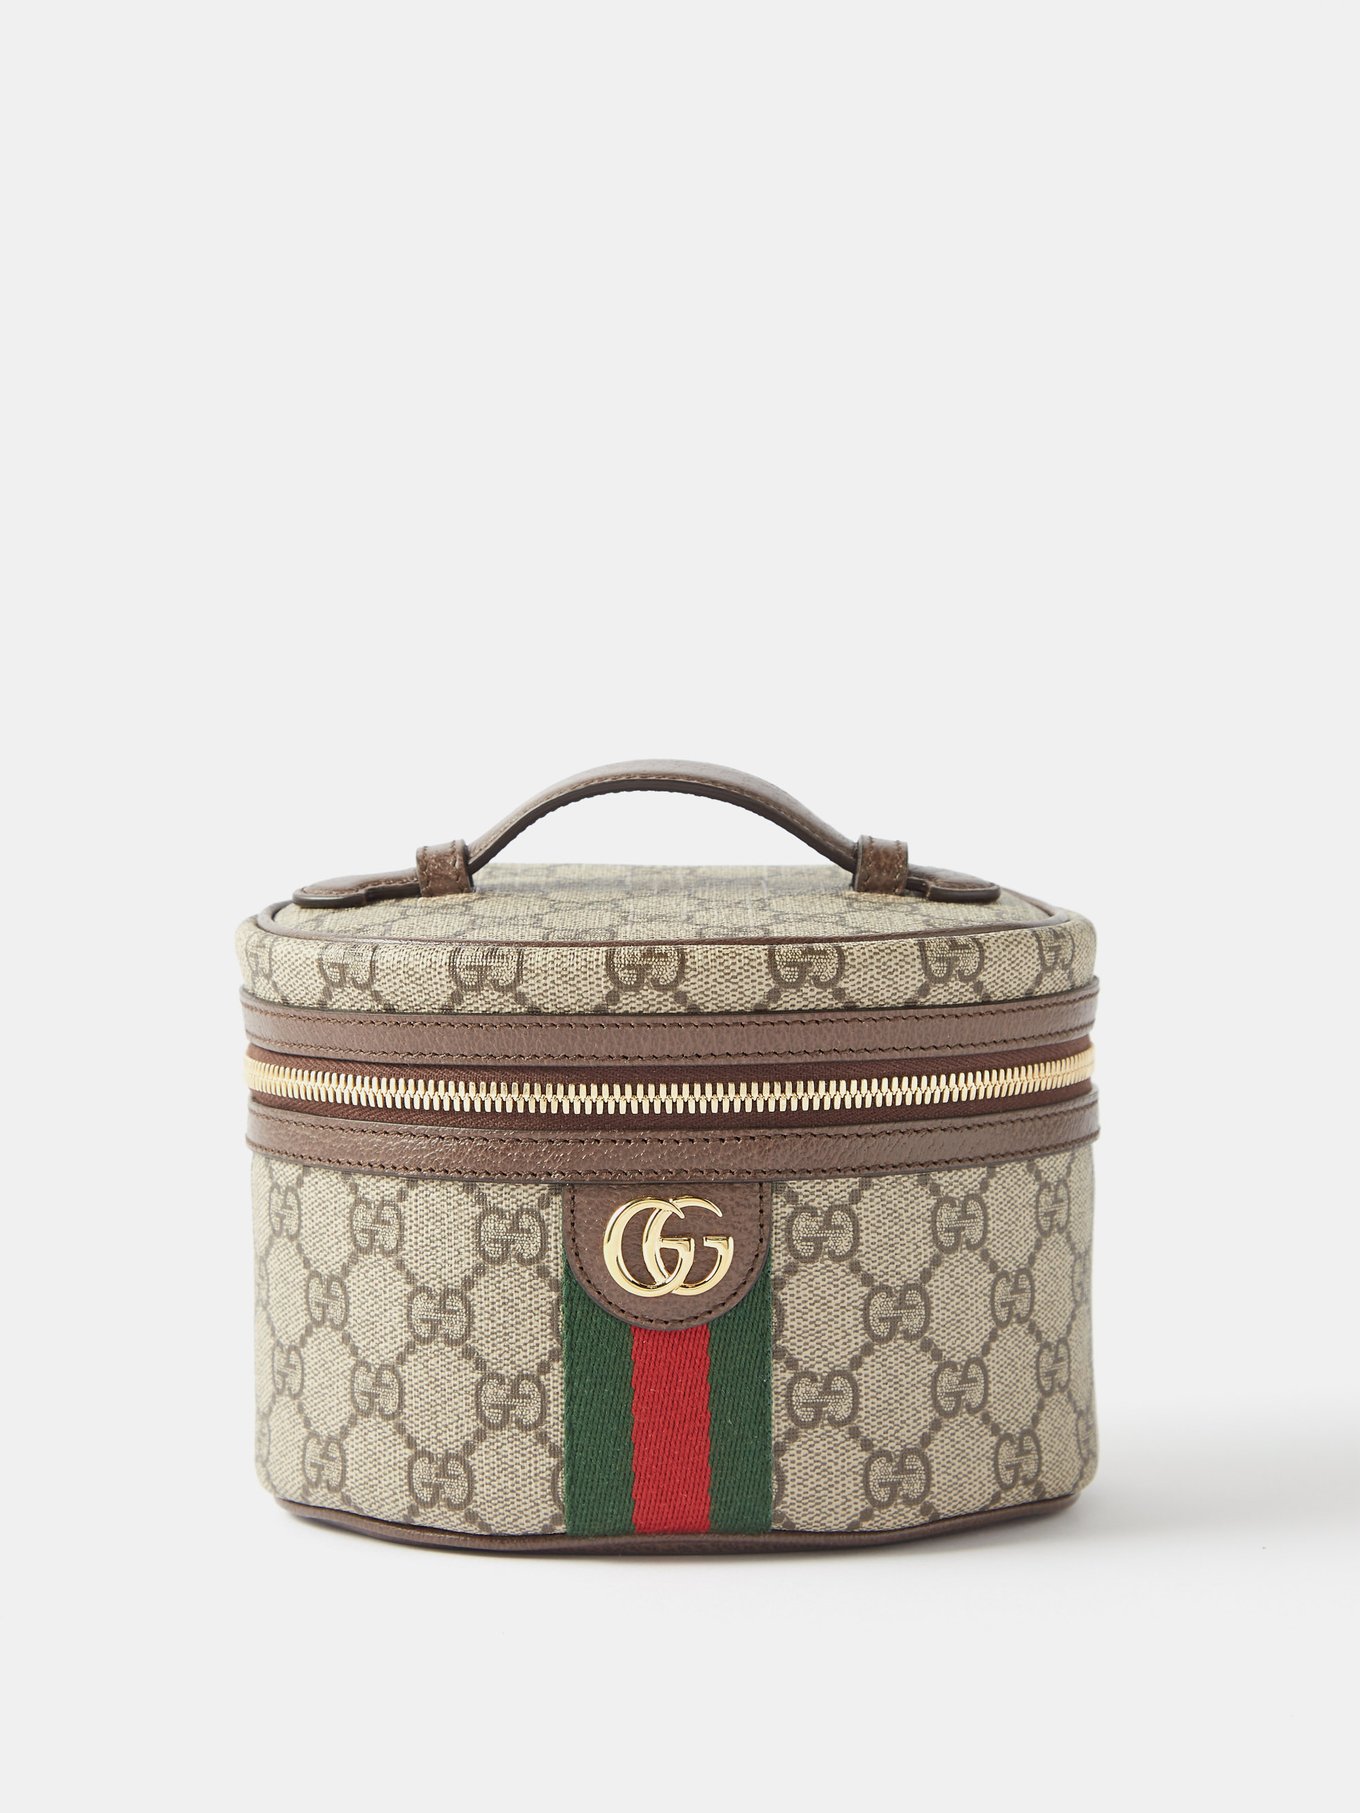 Ophidia toiletry case in grey and black Supreme